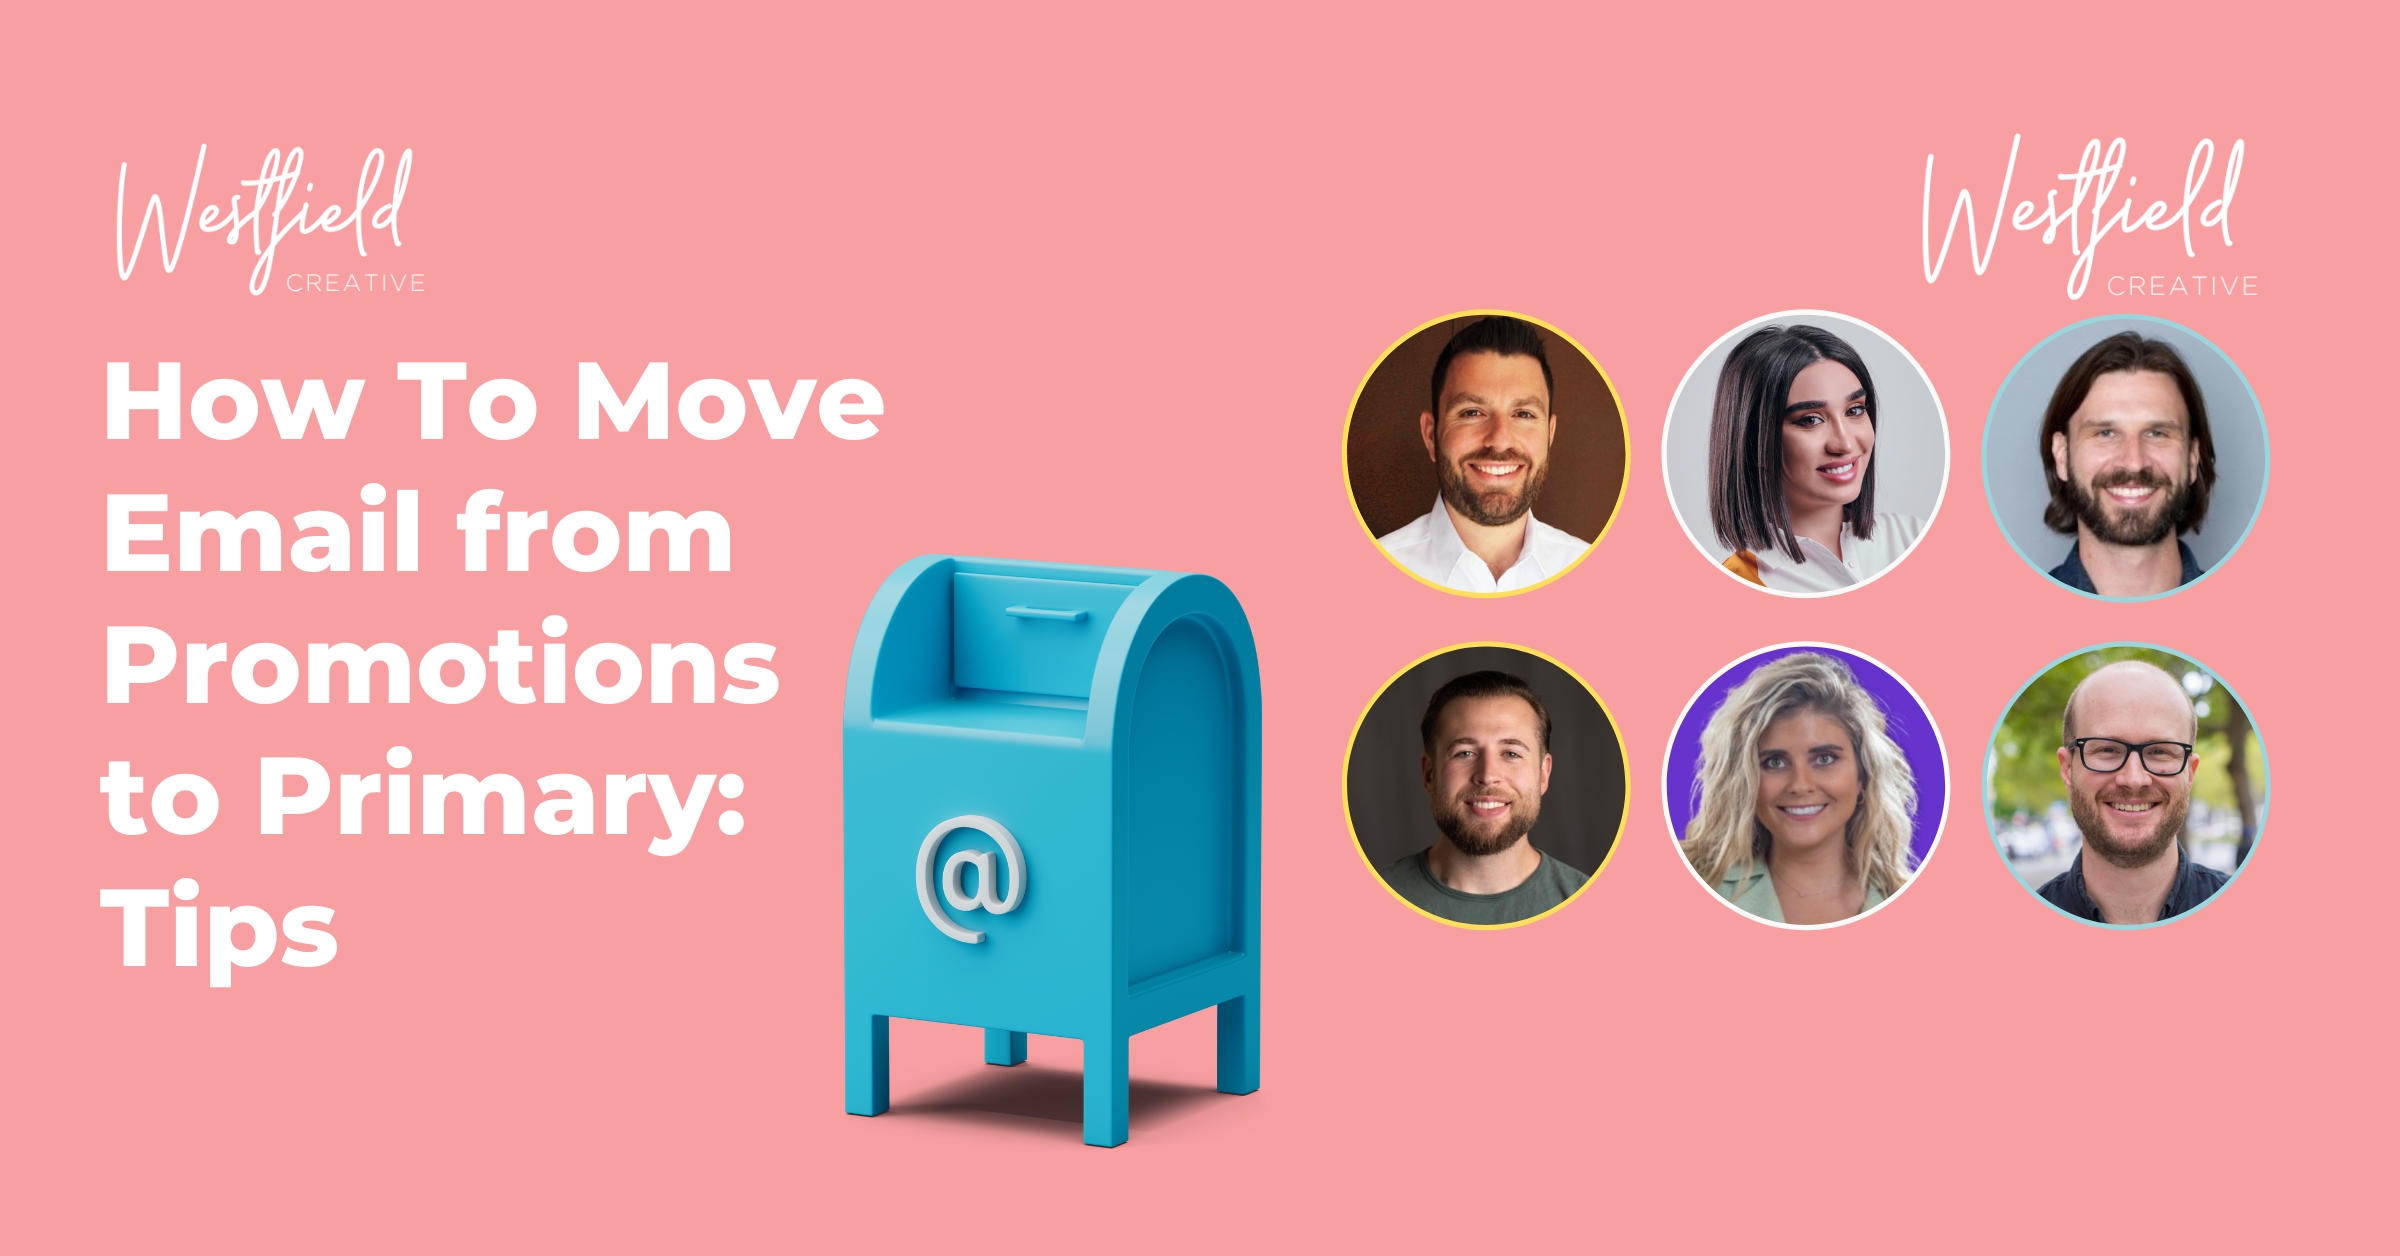 How To Move Email from Promotions to Primary